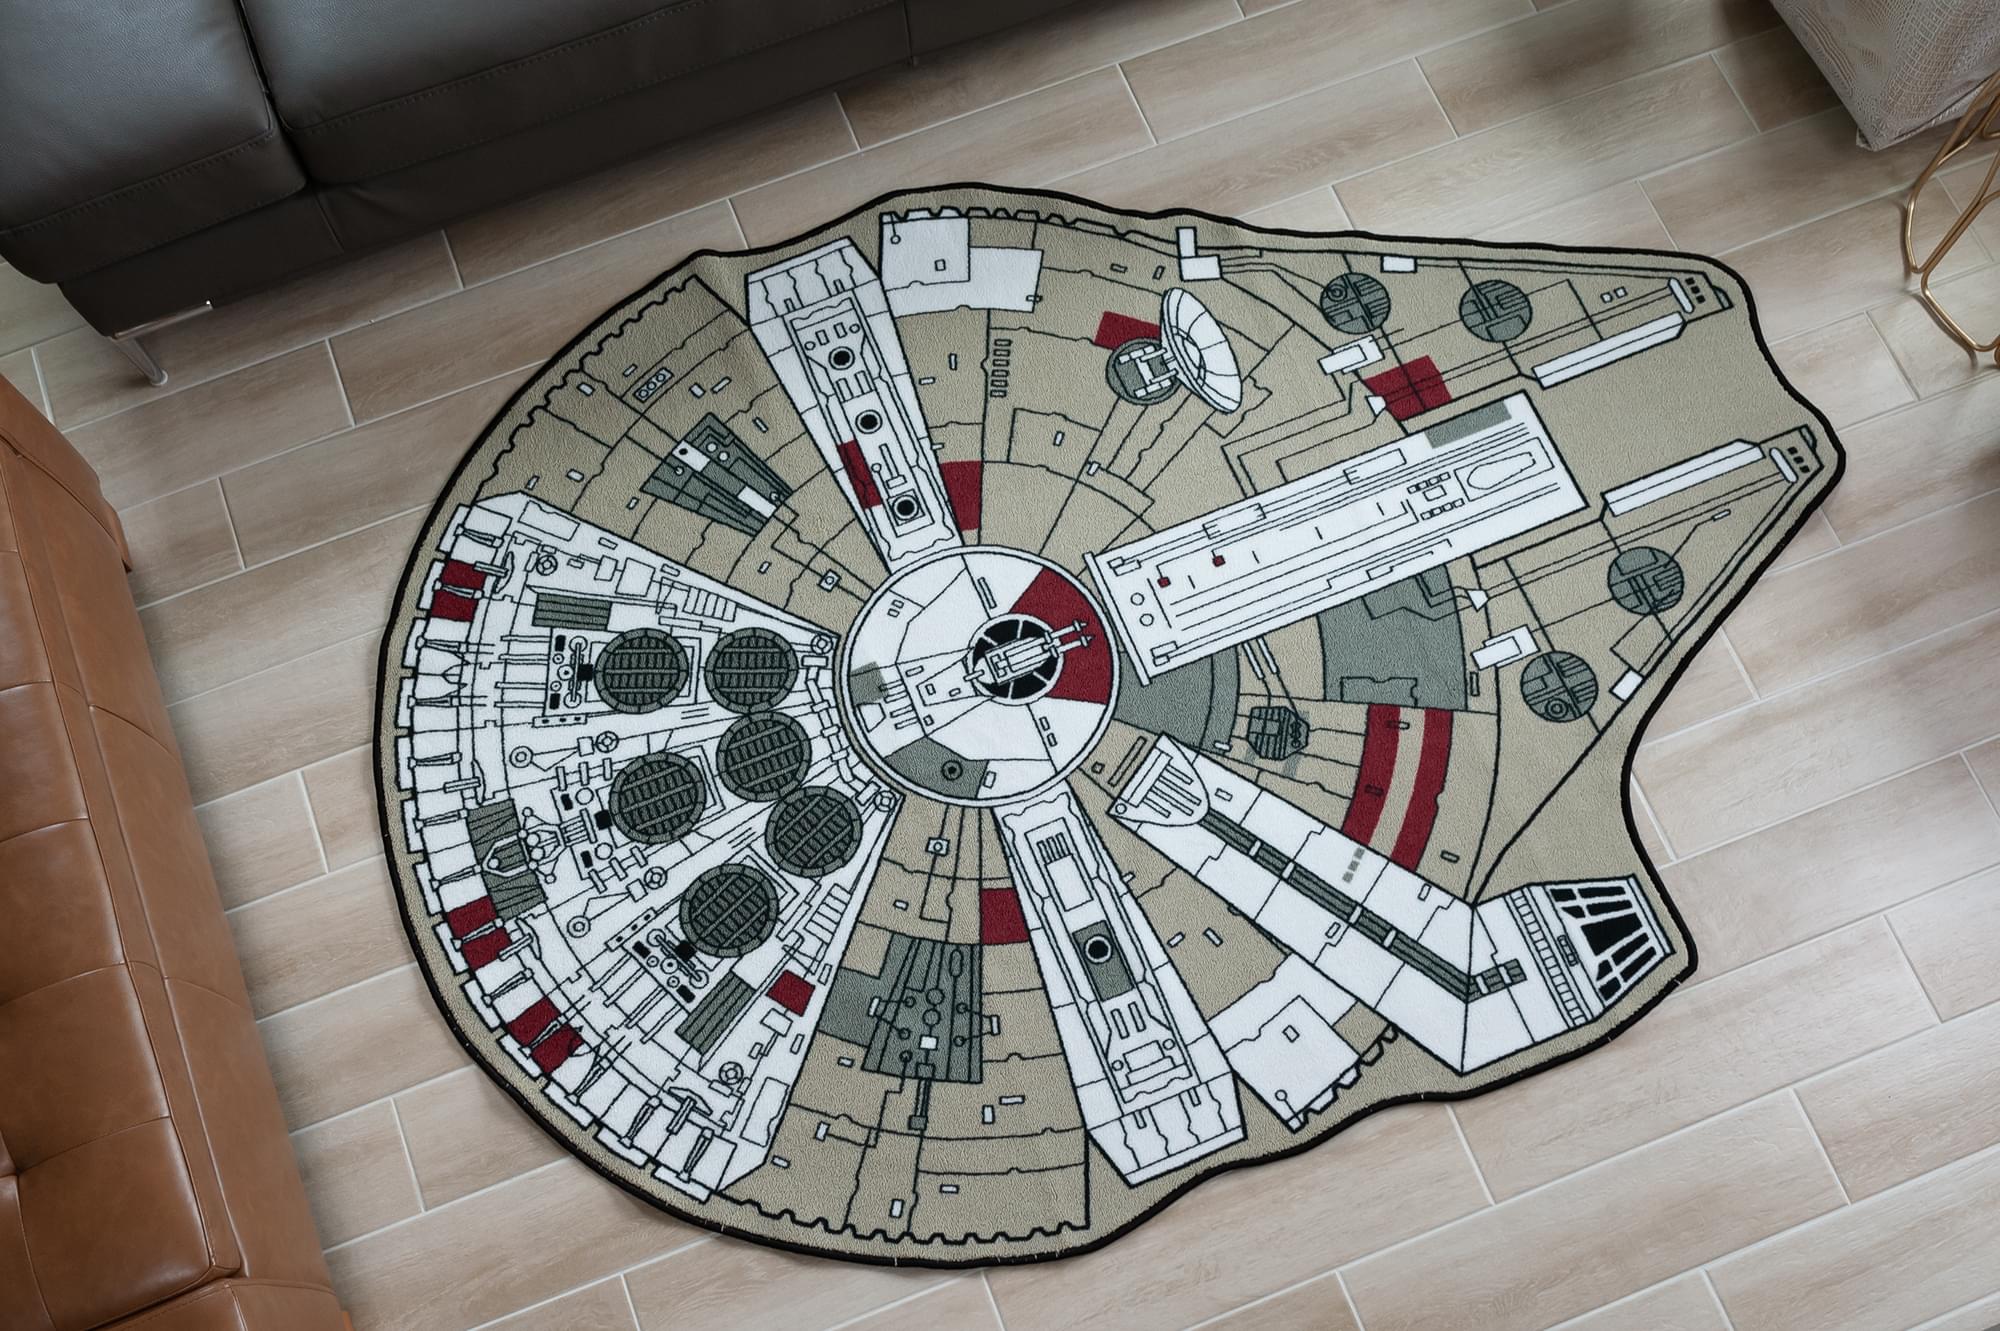 Star Wars Large Millennium Falcon Entry or Area Rug, 59" L x 79" W - image 5 of 7